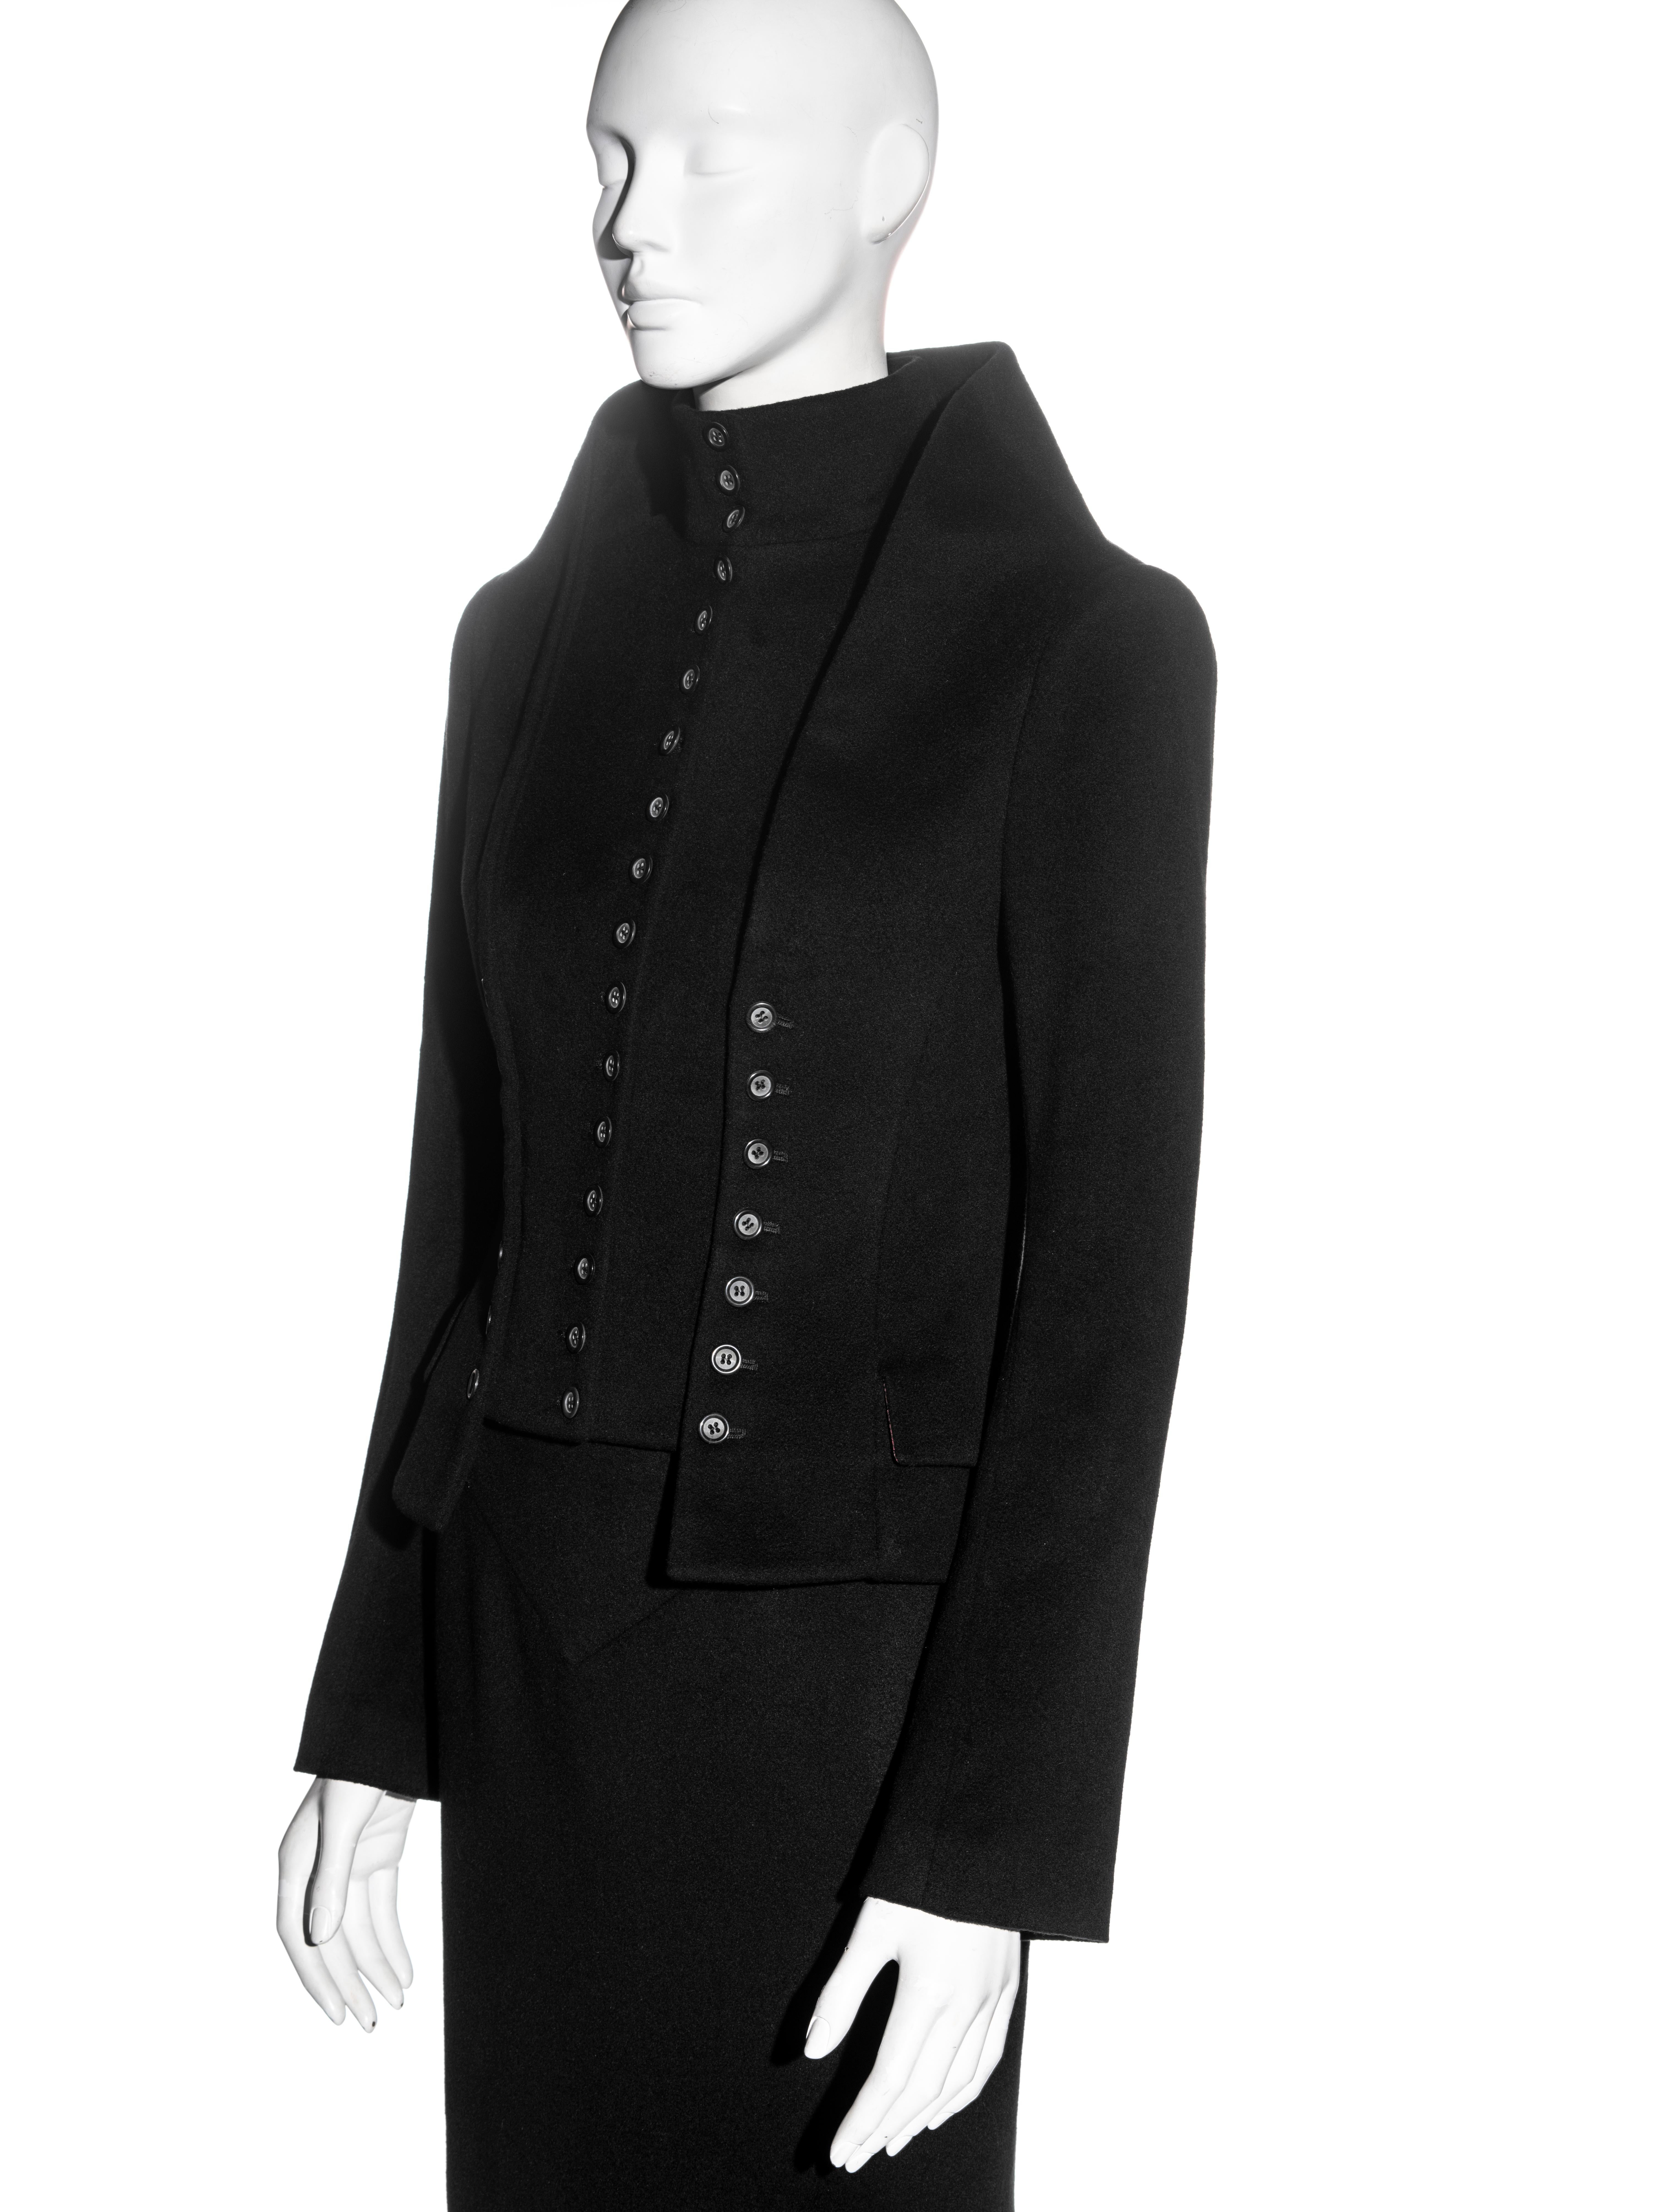 Alexander McQueen black cashmere 'Joan' jacket and skirt suit, fw 1998 For Sale 6